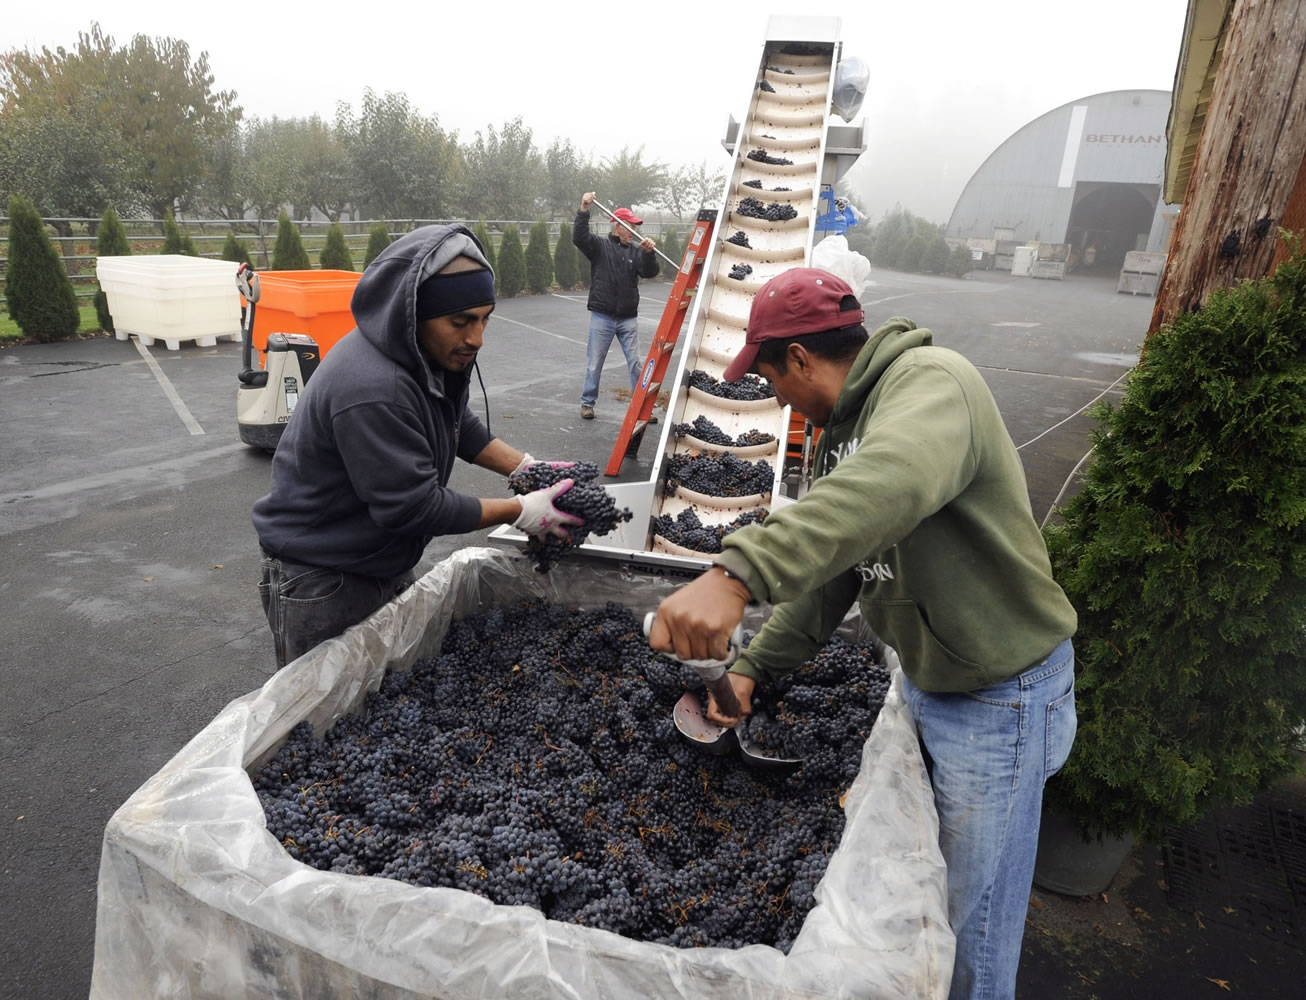 Miguel Serrano, left, and Edgar Ramos load San Giovese grapes Friday onto the conveyer belt that leads to the crusher at Bethany Vineyard in Ridgefield.